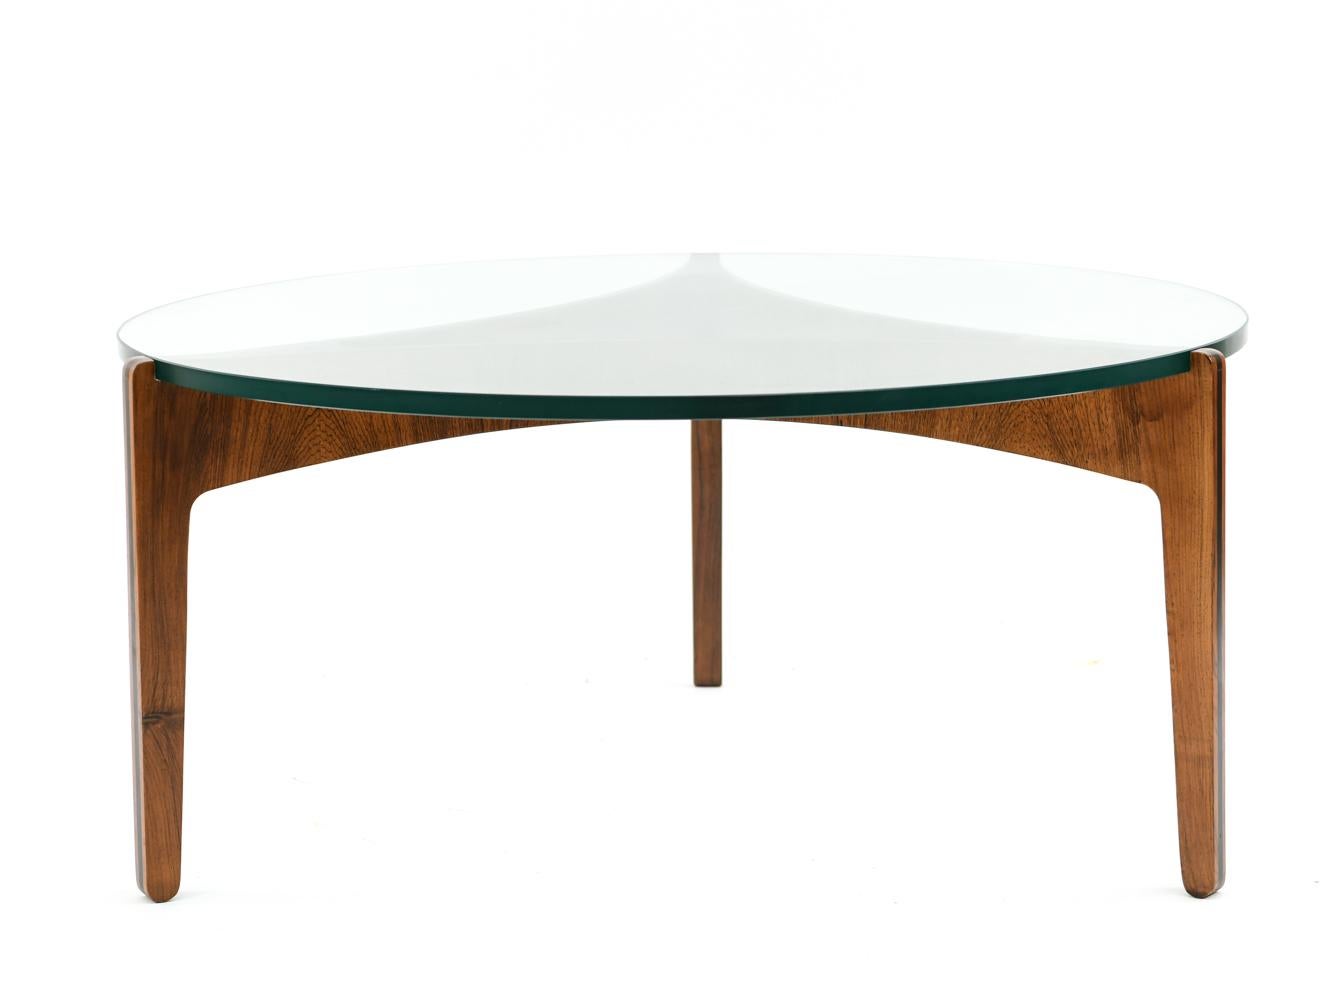 This gorgeous Danish midcentury coffee table was designed by Sven Ellekaer for Christian Linneberg, circa 1961. Featuring a sculptural rosewood base with ebony trim and a circular glass top.